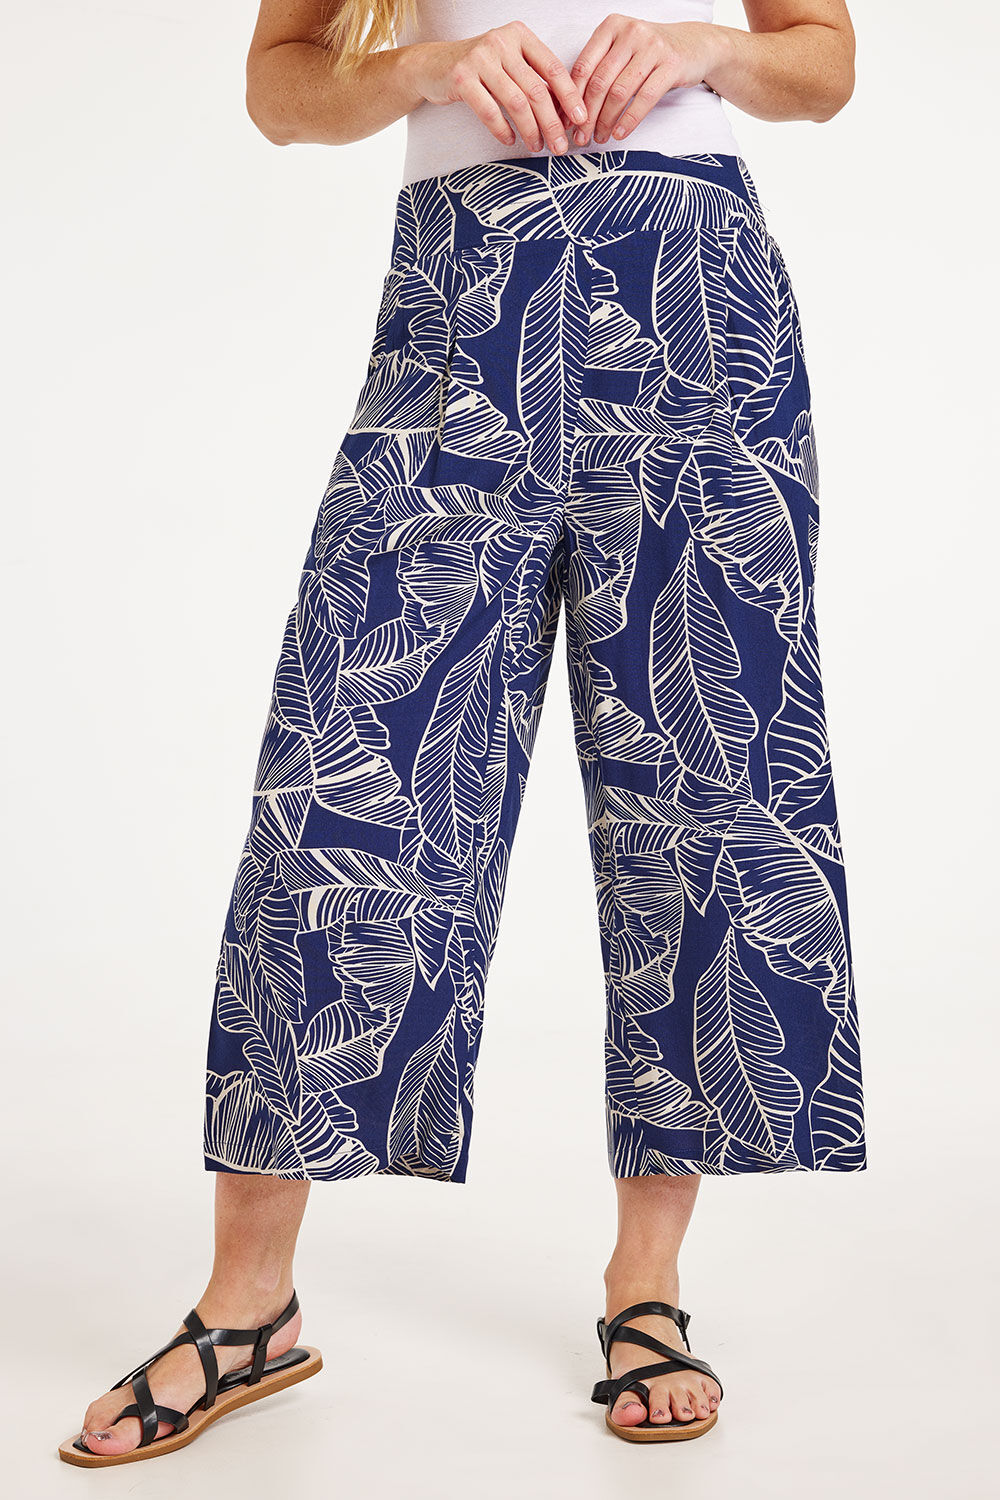 Bonmarche Navy Palm Print Pleated Front Cropped Trousers, Size: 10